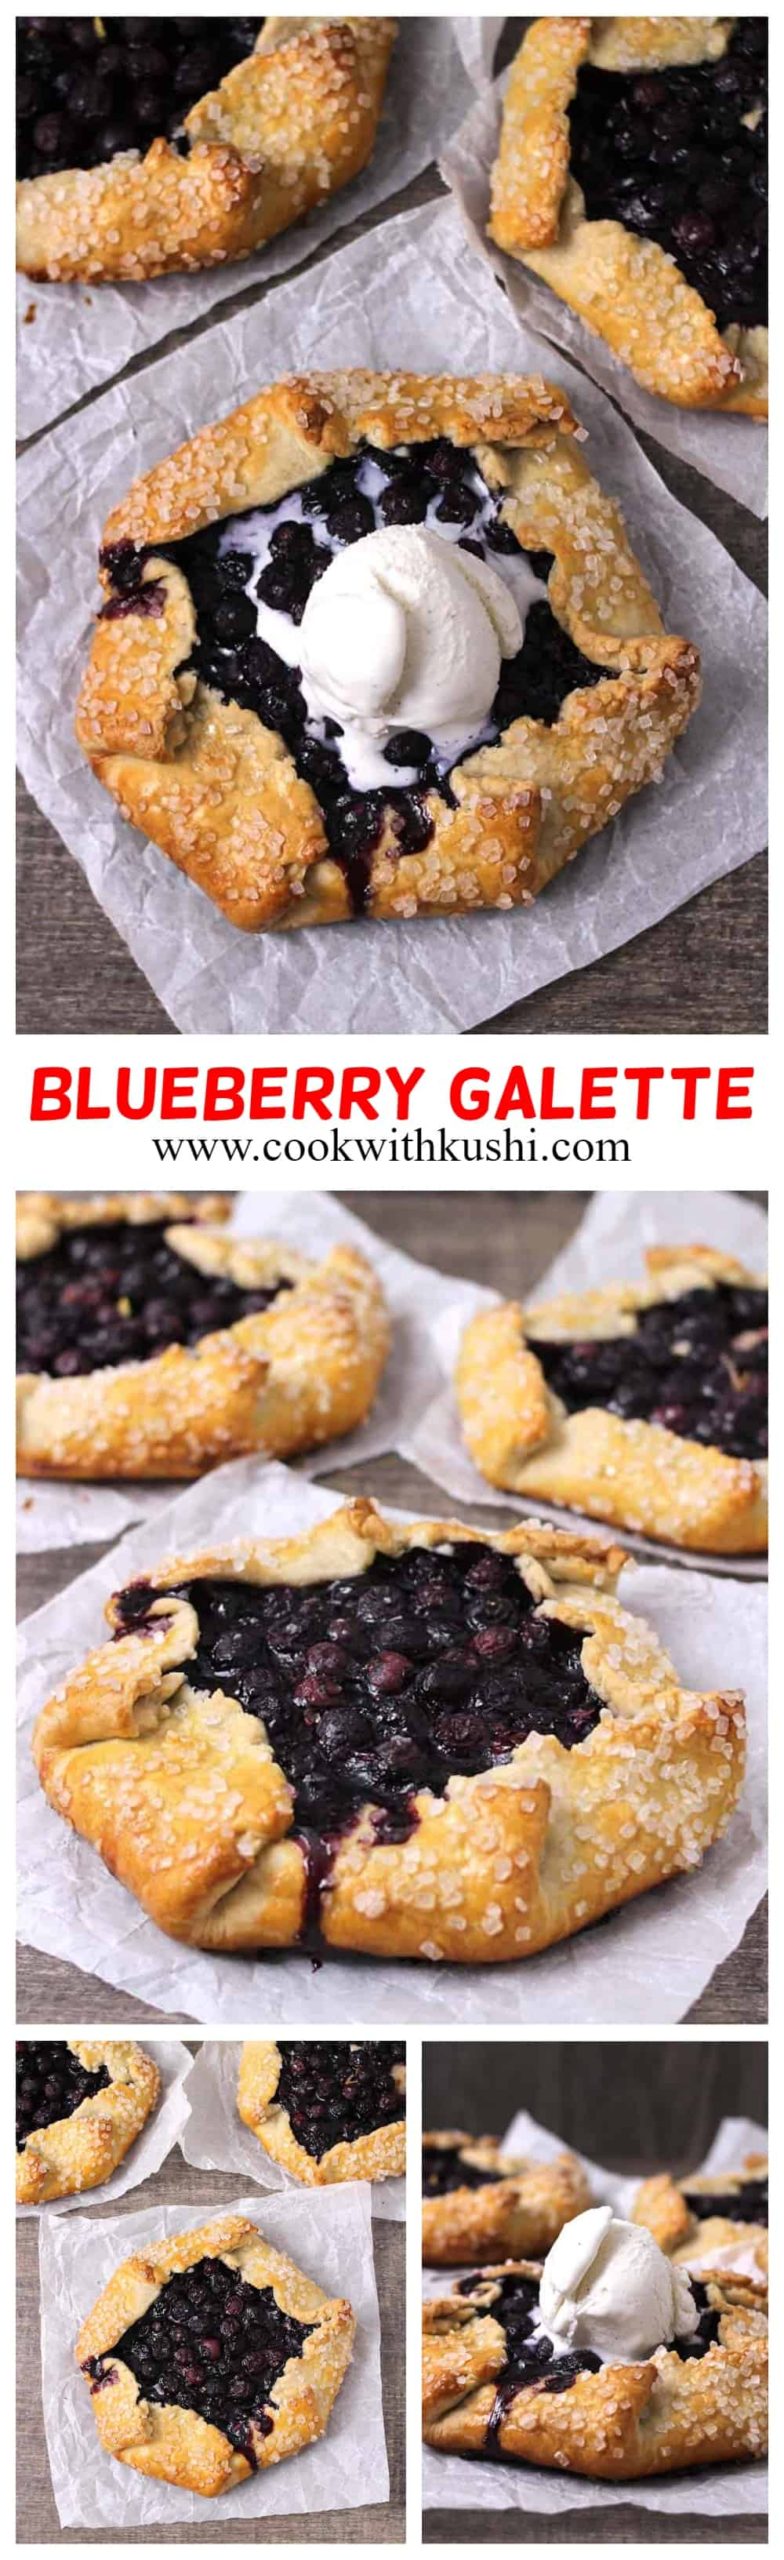 Blueberry Galette or Blueberry Crostata is simple and easy to make, yet so impressive fancy dessert where the sweet and fresh blueberries are encased in perfectly crispy, flaky and buttery homemade pie crust. The best summer dessert recipe! #blueberries #Blueberry #galette #pastrydough #crostata #piedough #Puffpastry #summerdesserts #holidaydesserts #applegalette #blueberrydesserts #freshbluberryrecipes